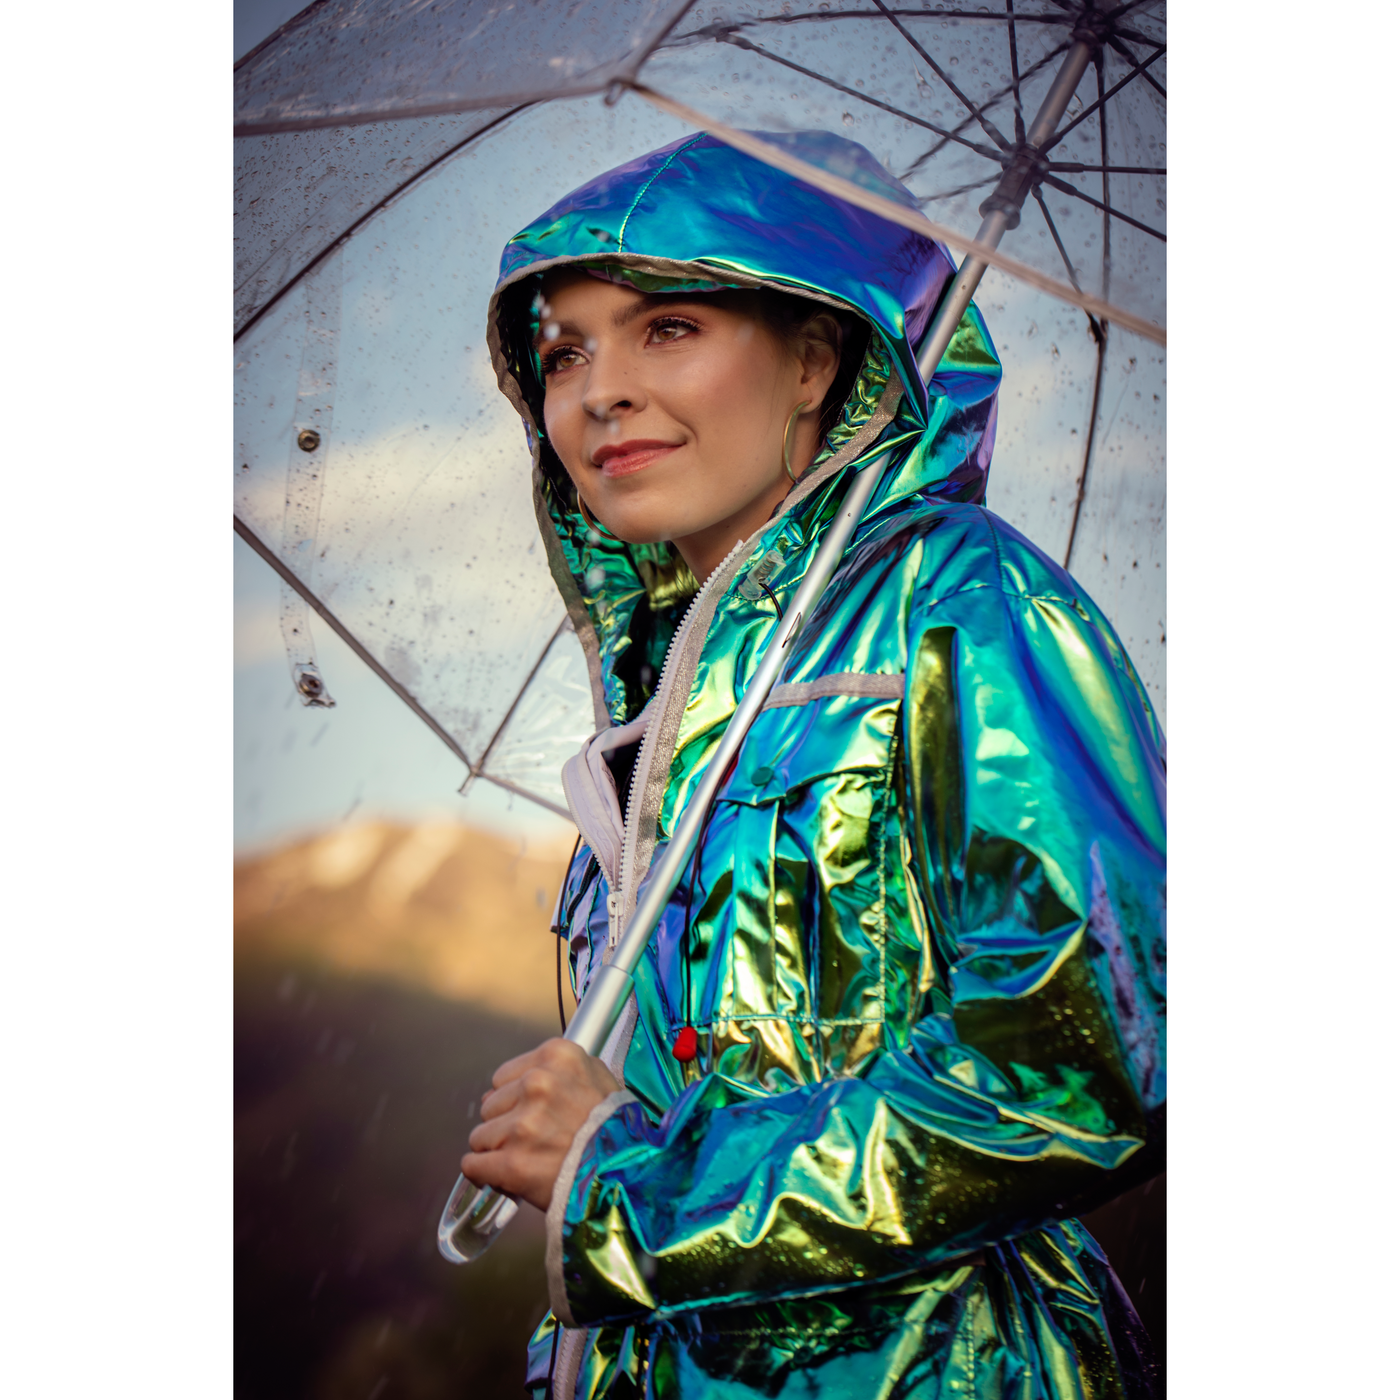 Image of a woman wearing a metallic green women’s mid-season jacket with the hood up in the rain